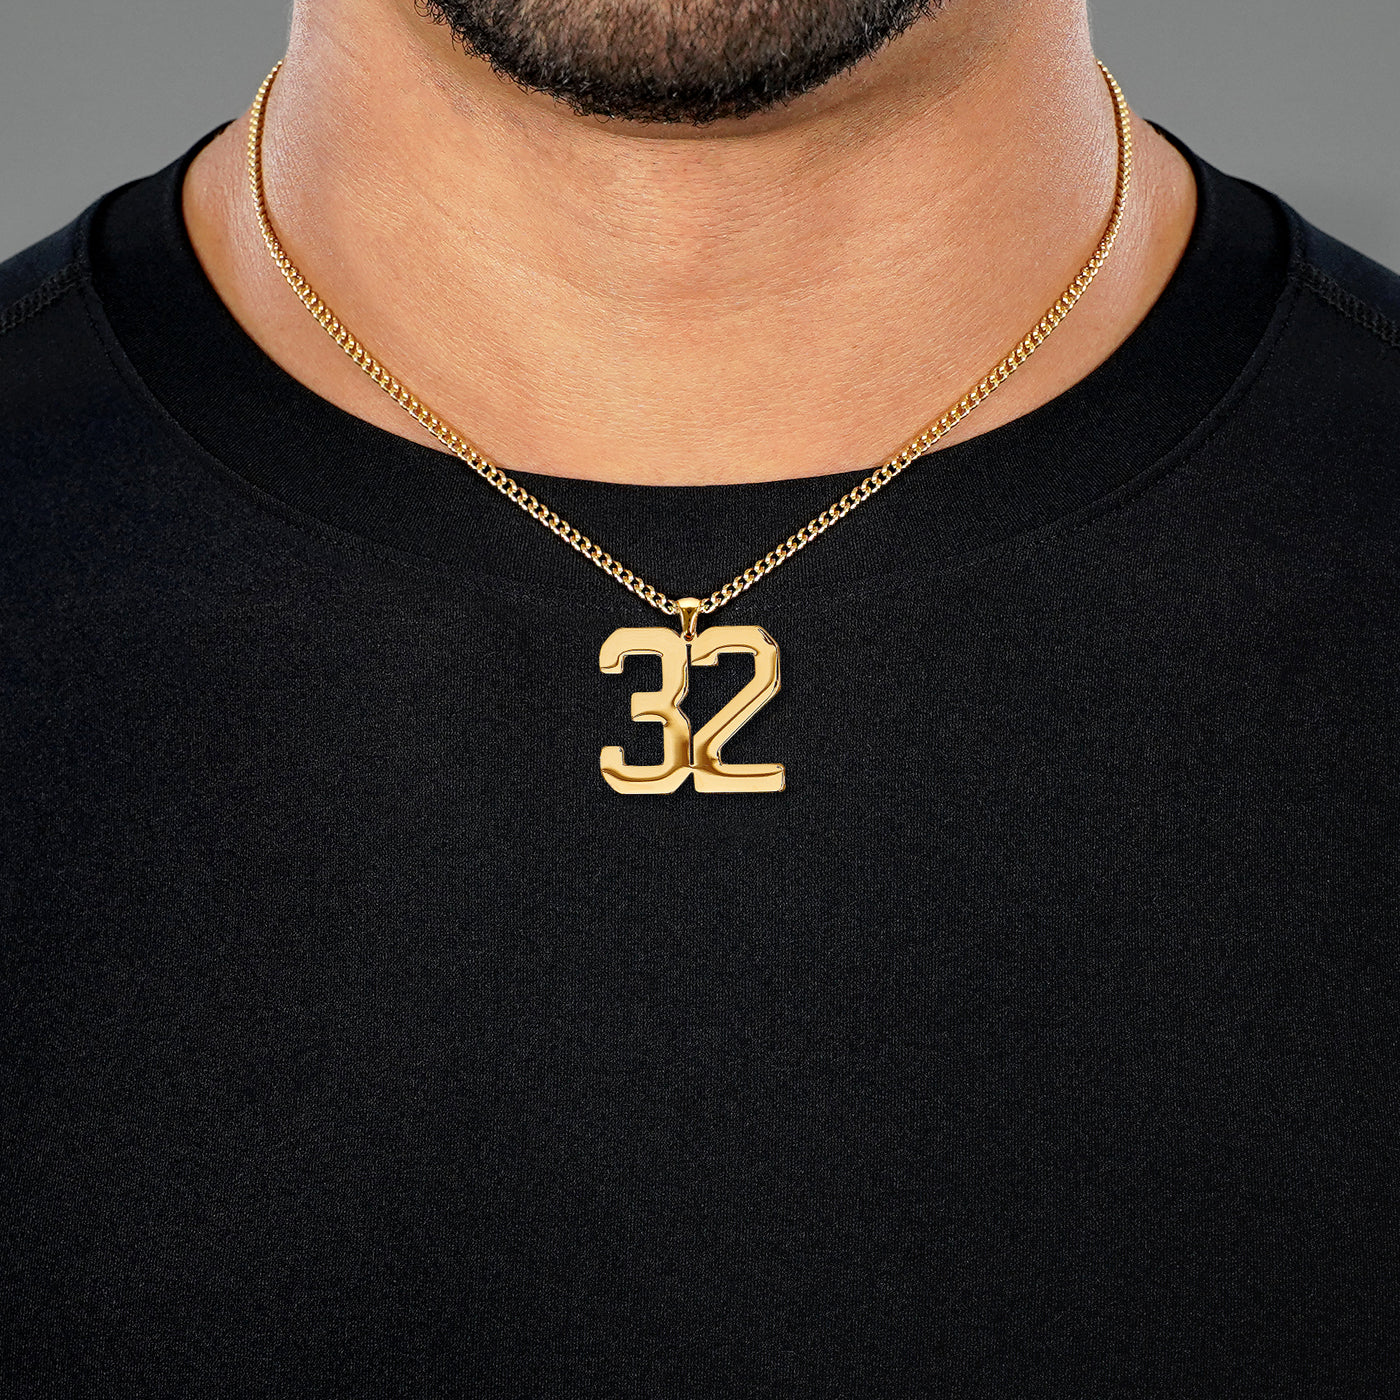 32 Number Pendant with Chain Necklace - Gold Plated Stainless Steel